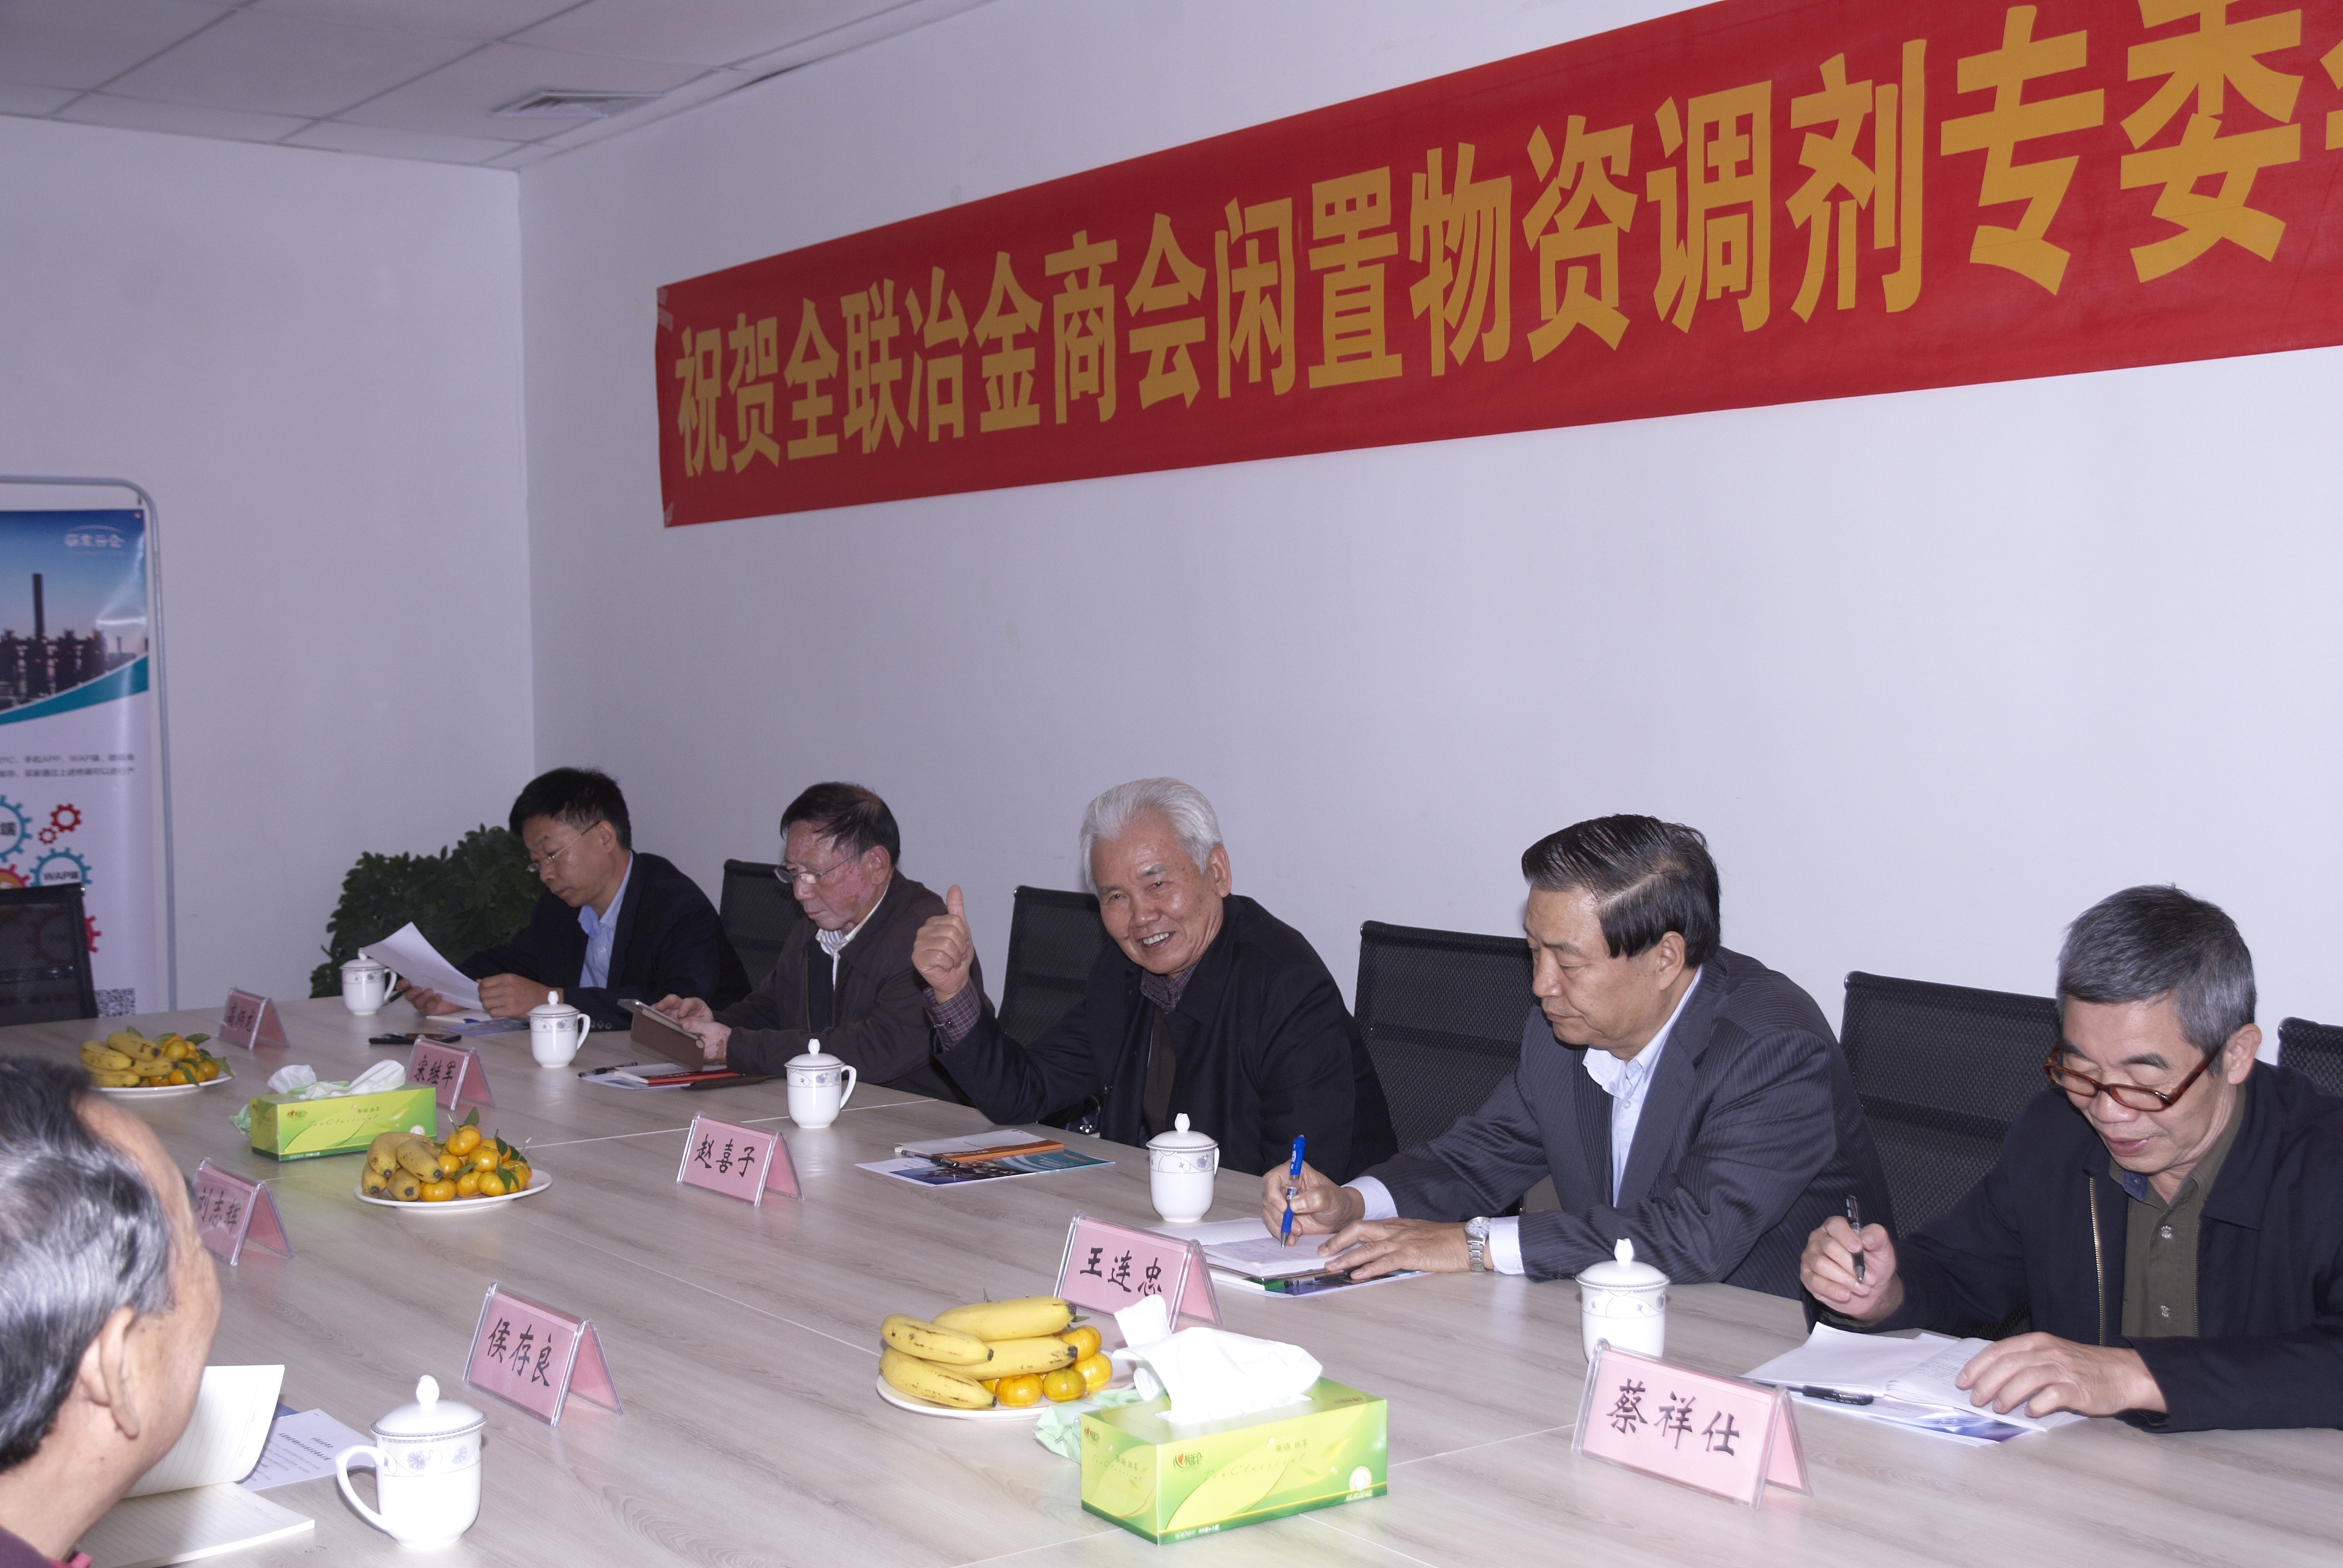 The leader of China Metallugical Associational visit our company